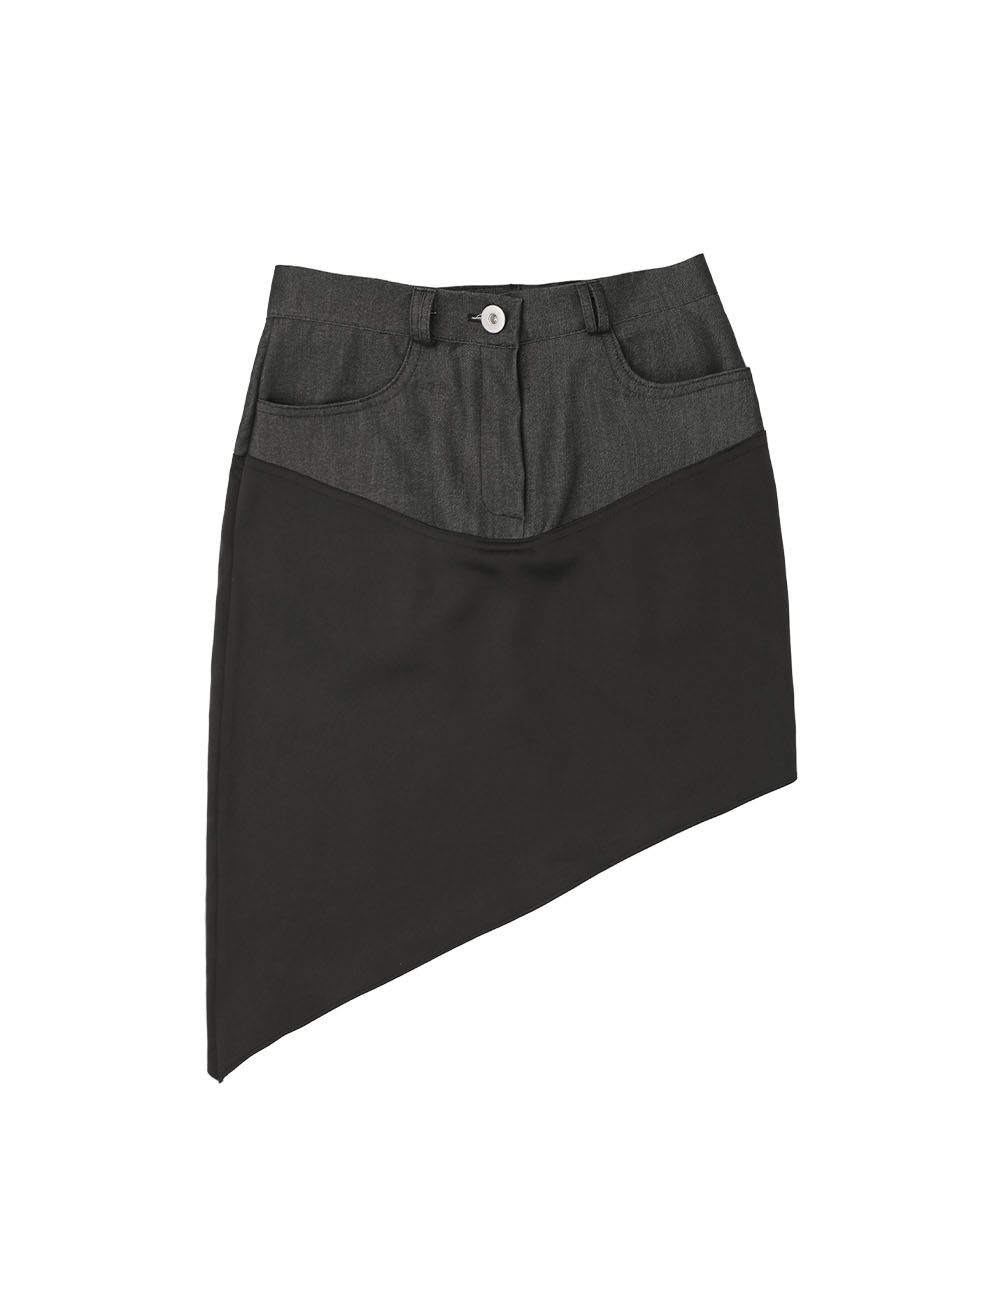 OFFICIAL COLORING SKIRT(BLACK)